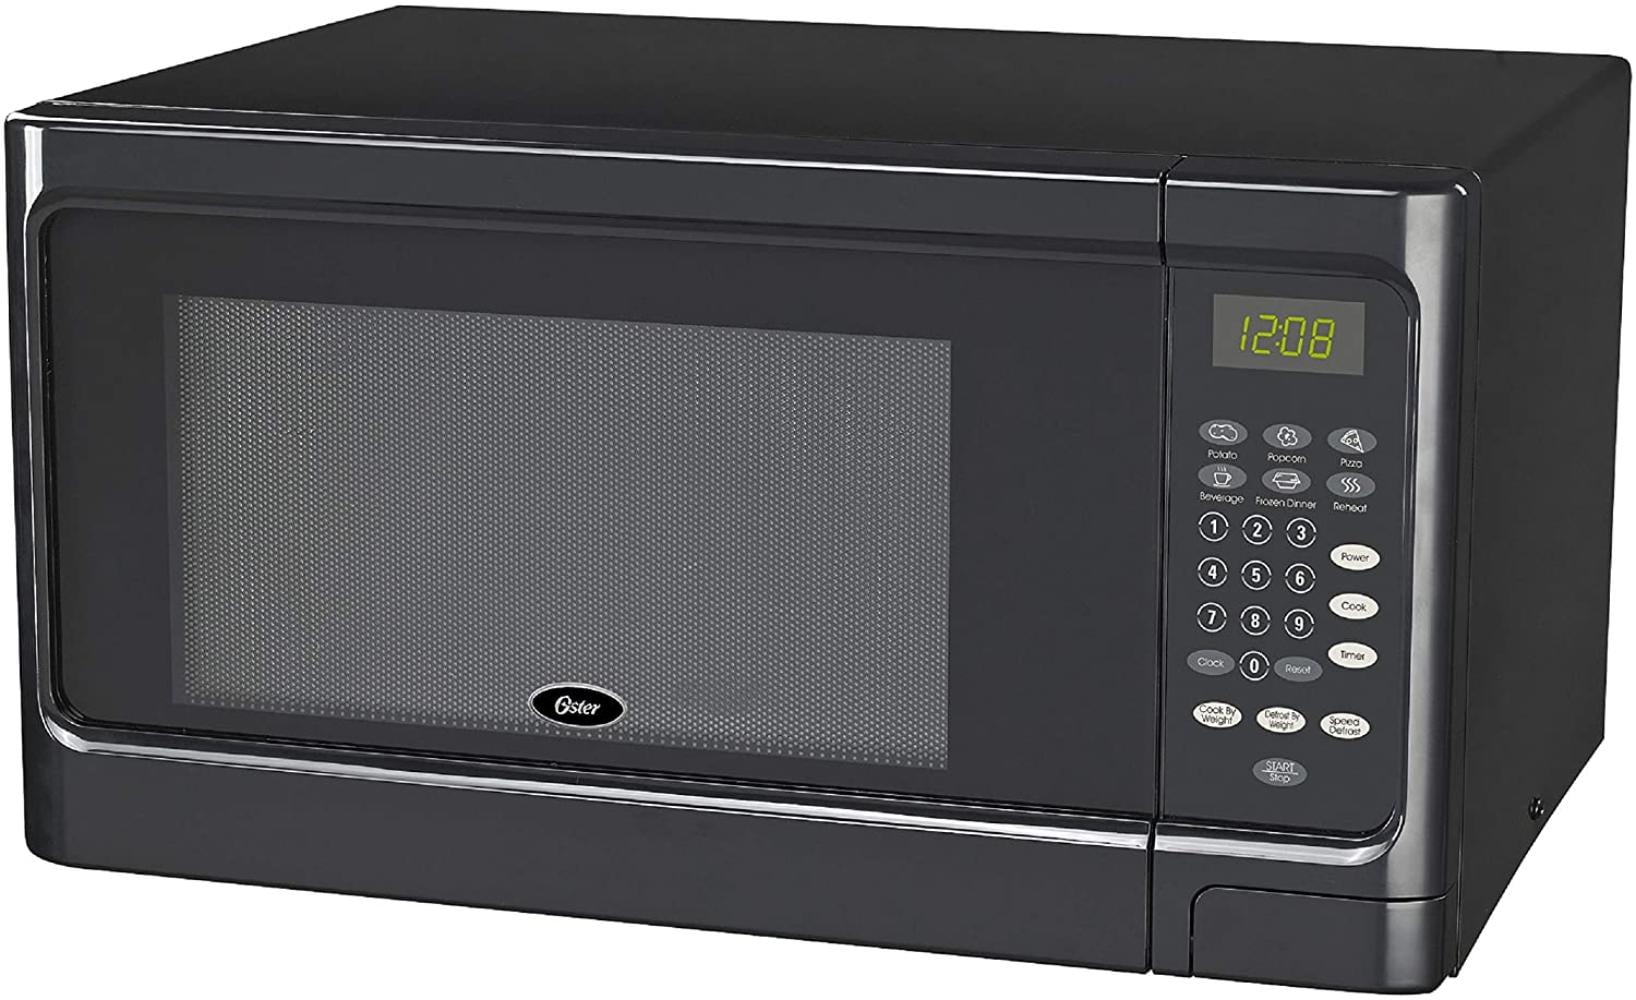 Oster OGCMS311BK-10 1.1 cu. Ft. Microwave Oven, Black, COMPACT-SIZE